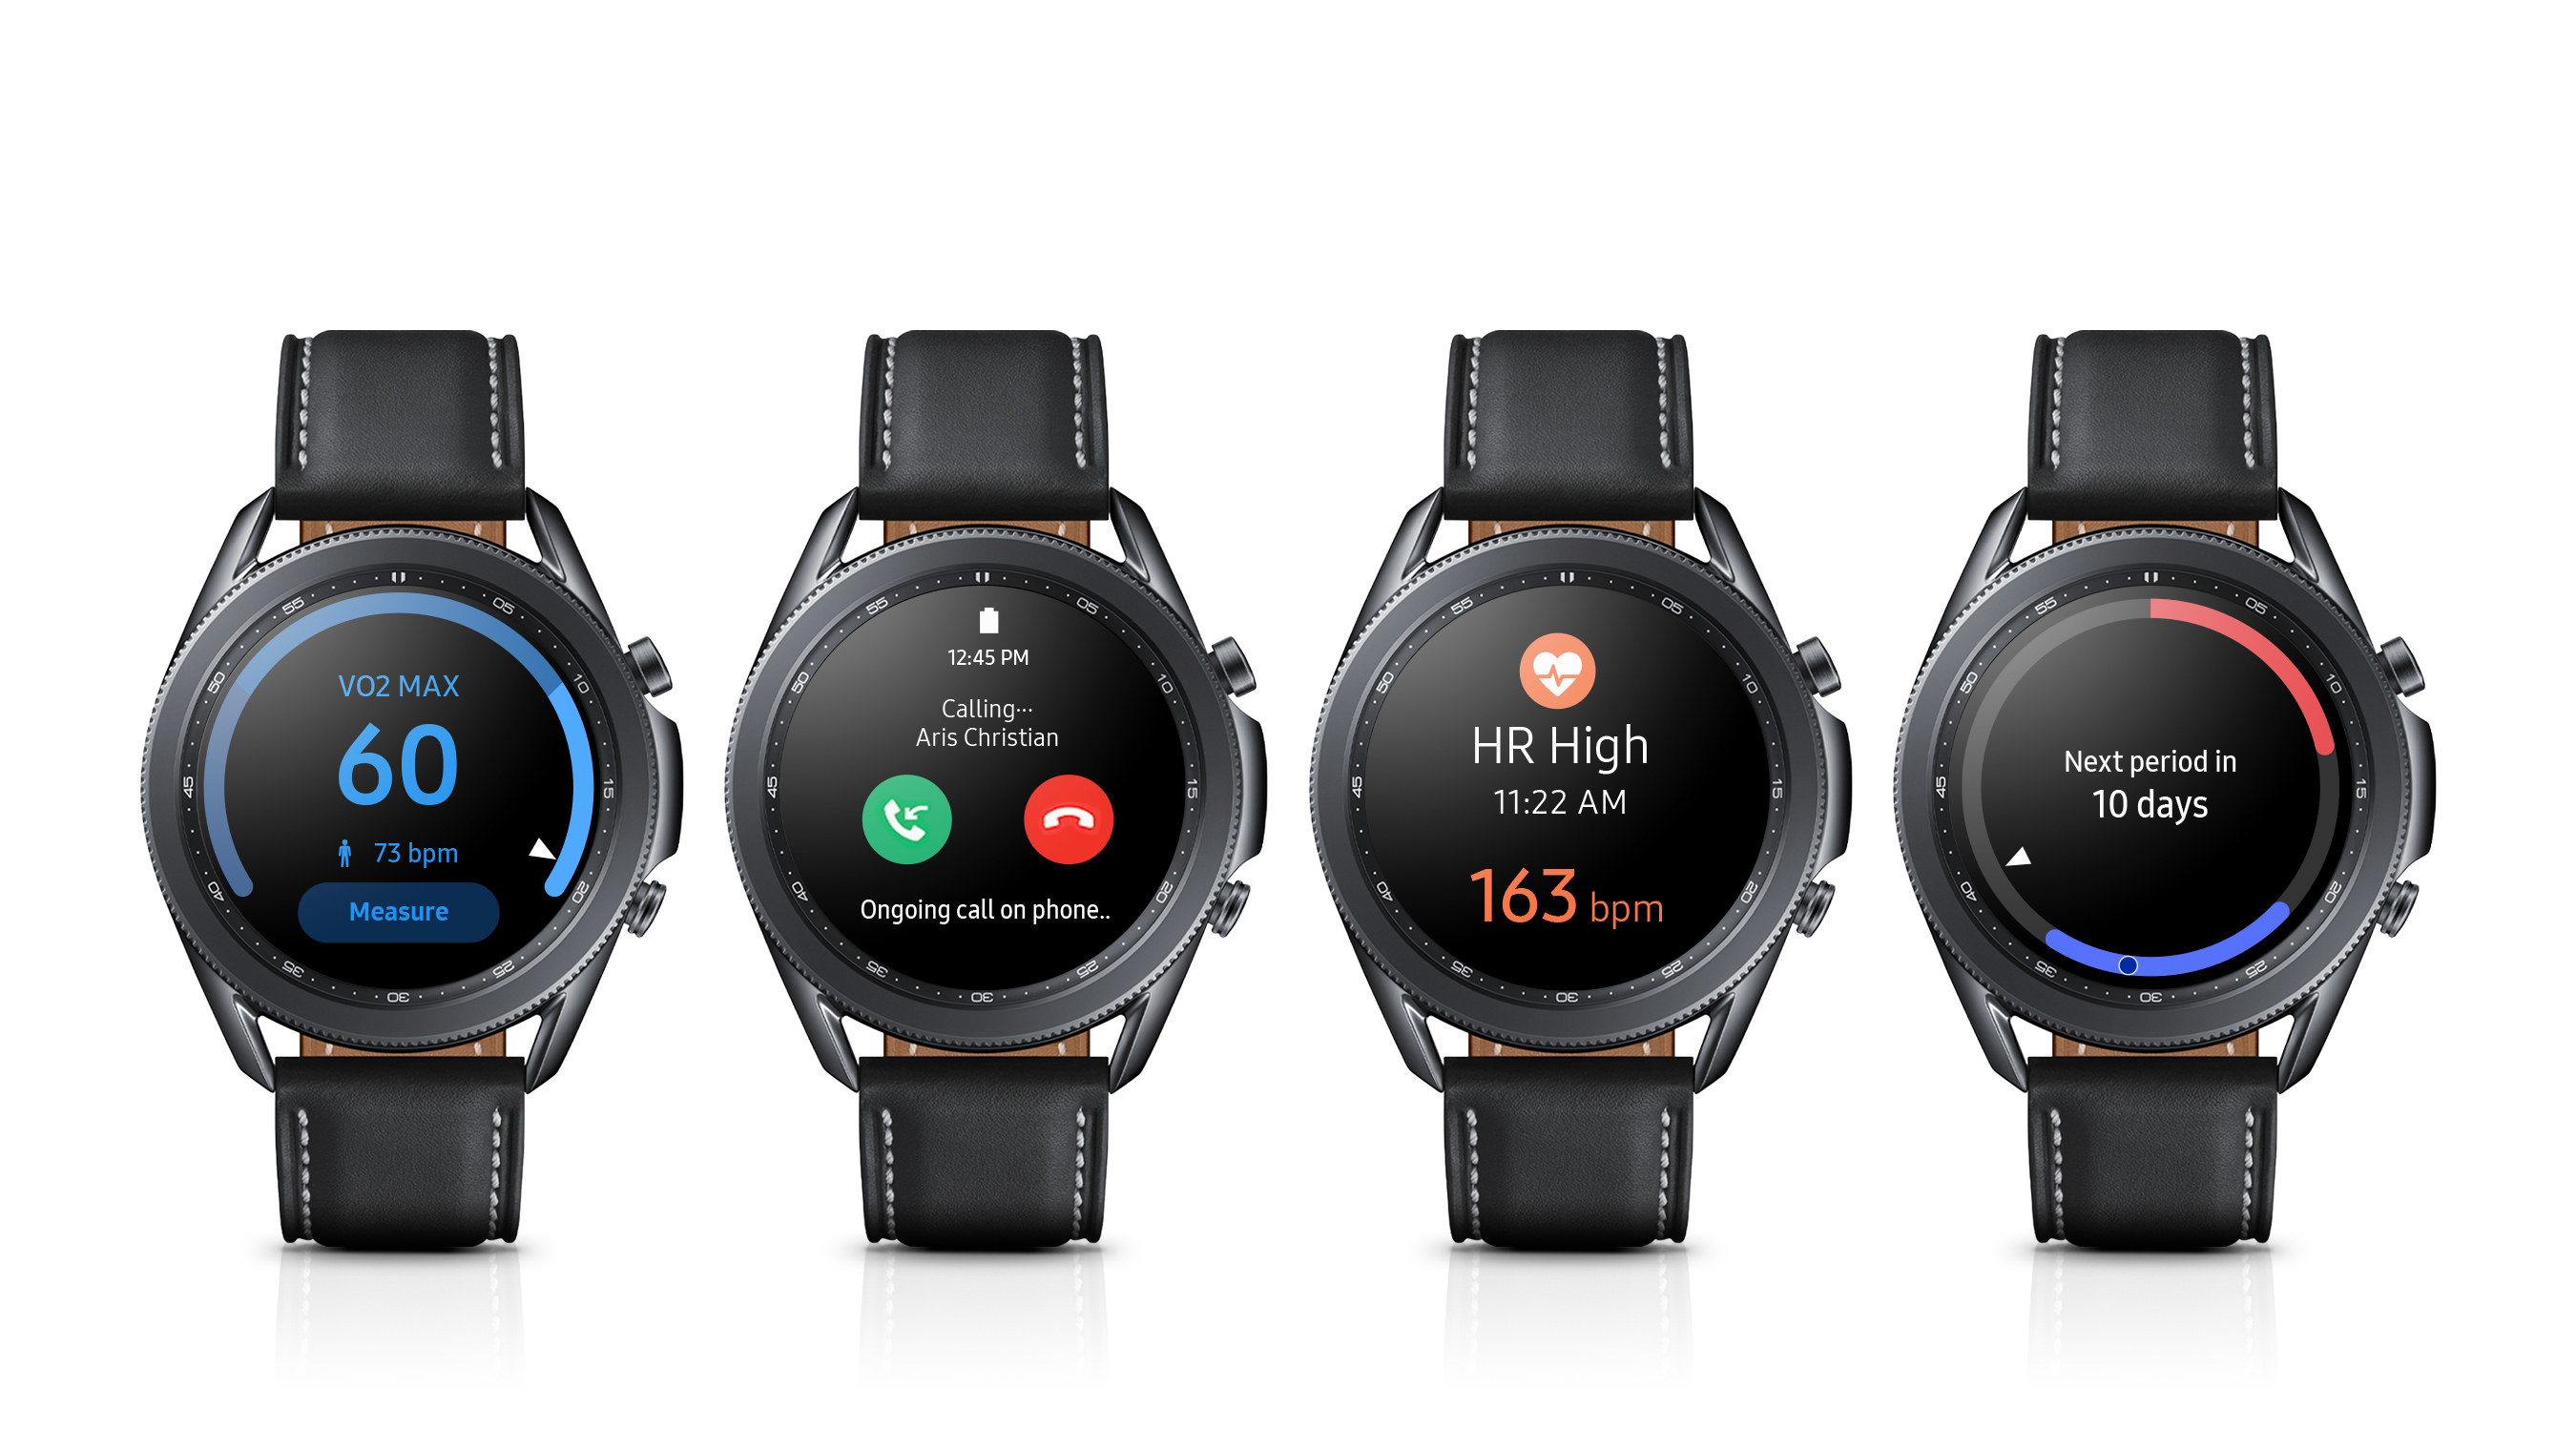 The Samsung Galaxy Watch3&#x27;s V02 max, Trip Detection, Heart Rate, and Glow App features